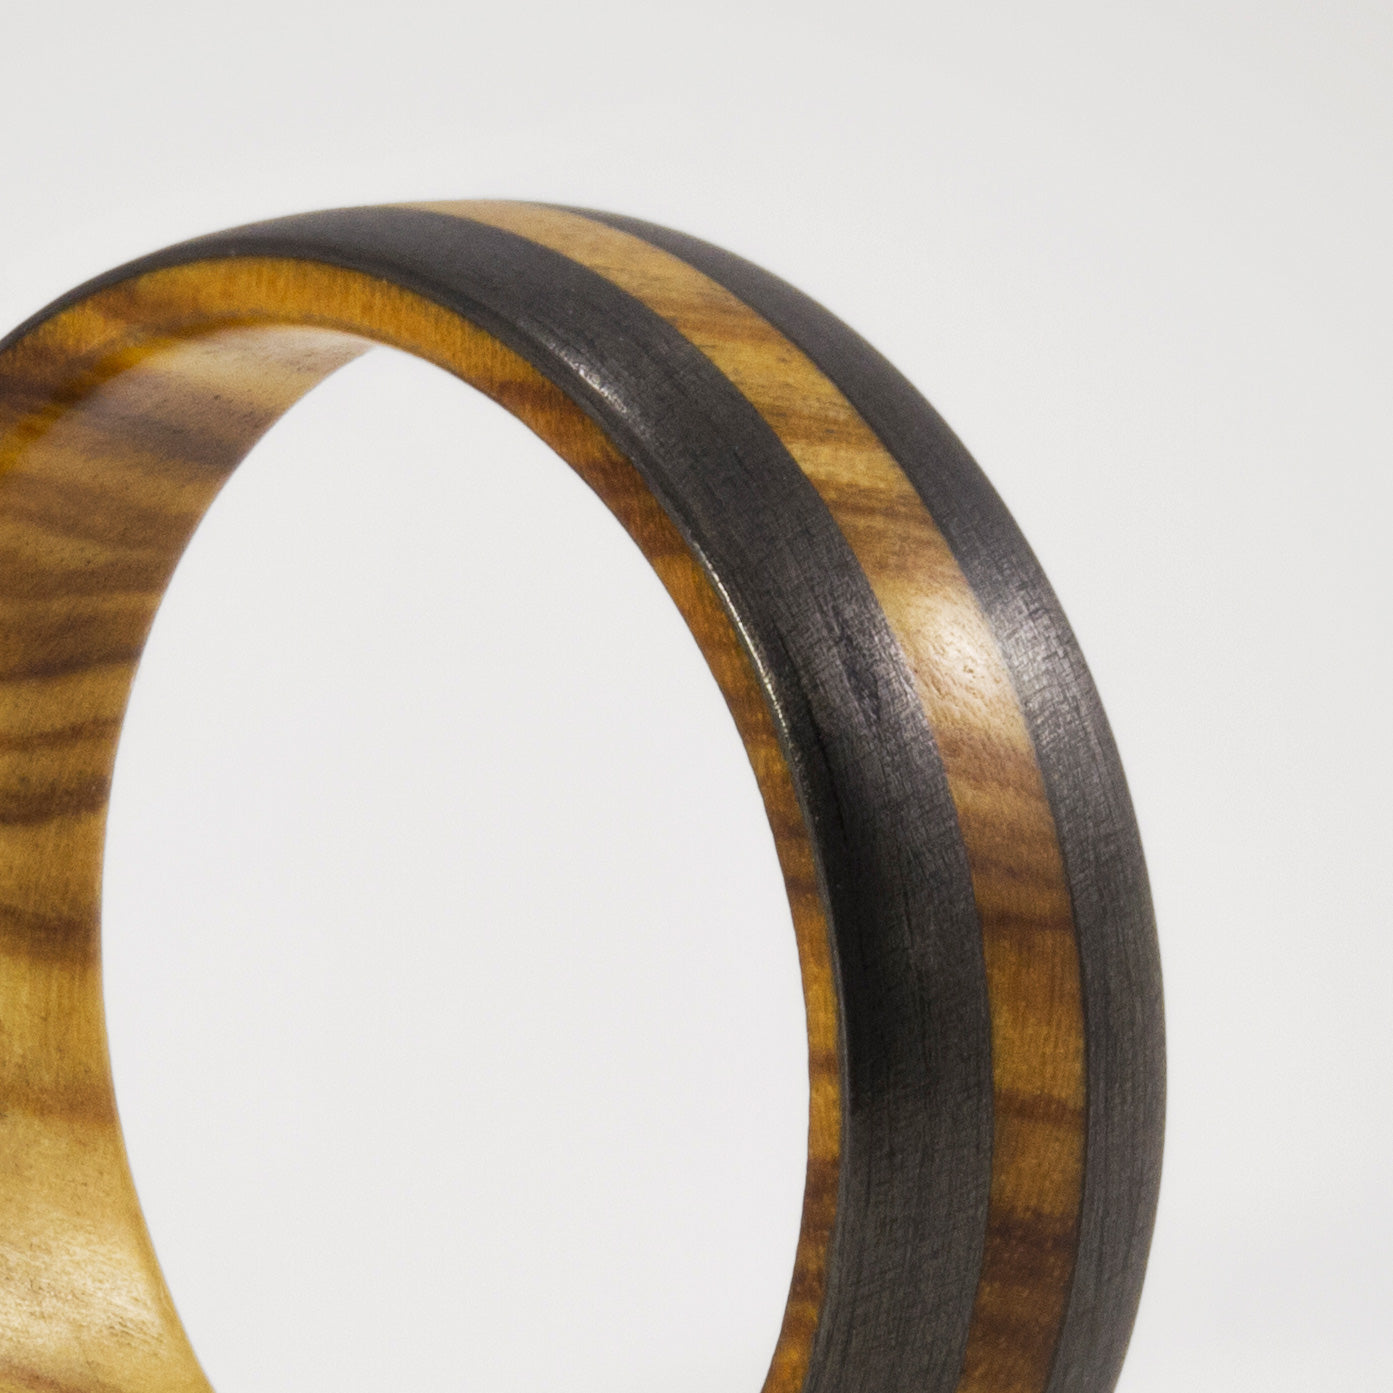 carbon fiber and Olive wood Ring